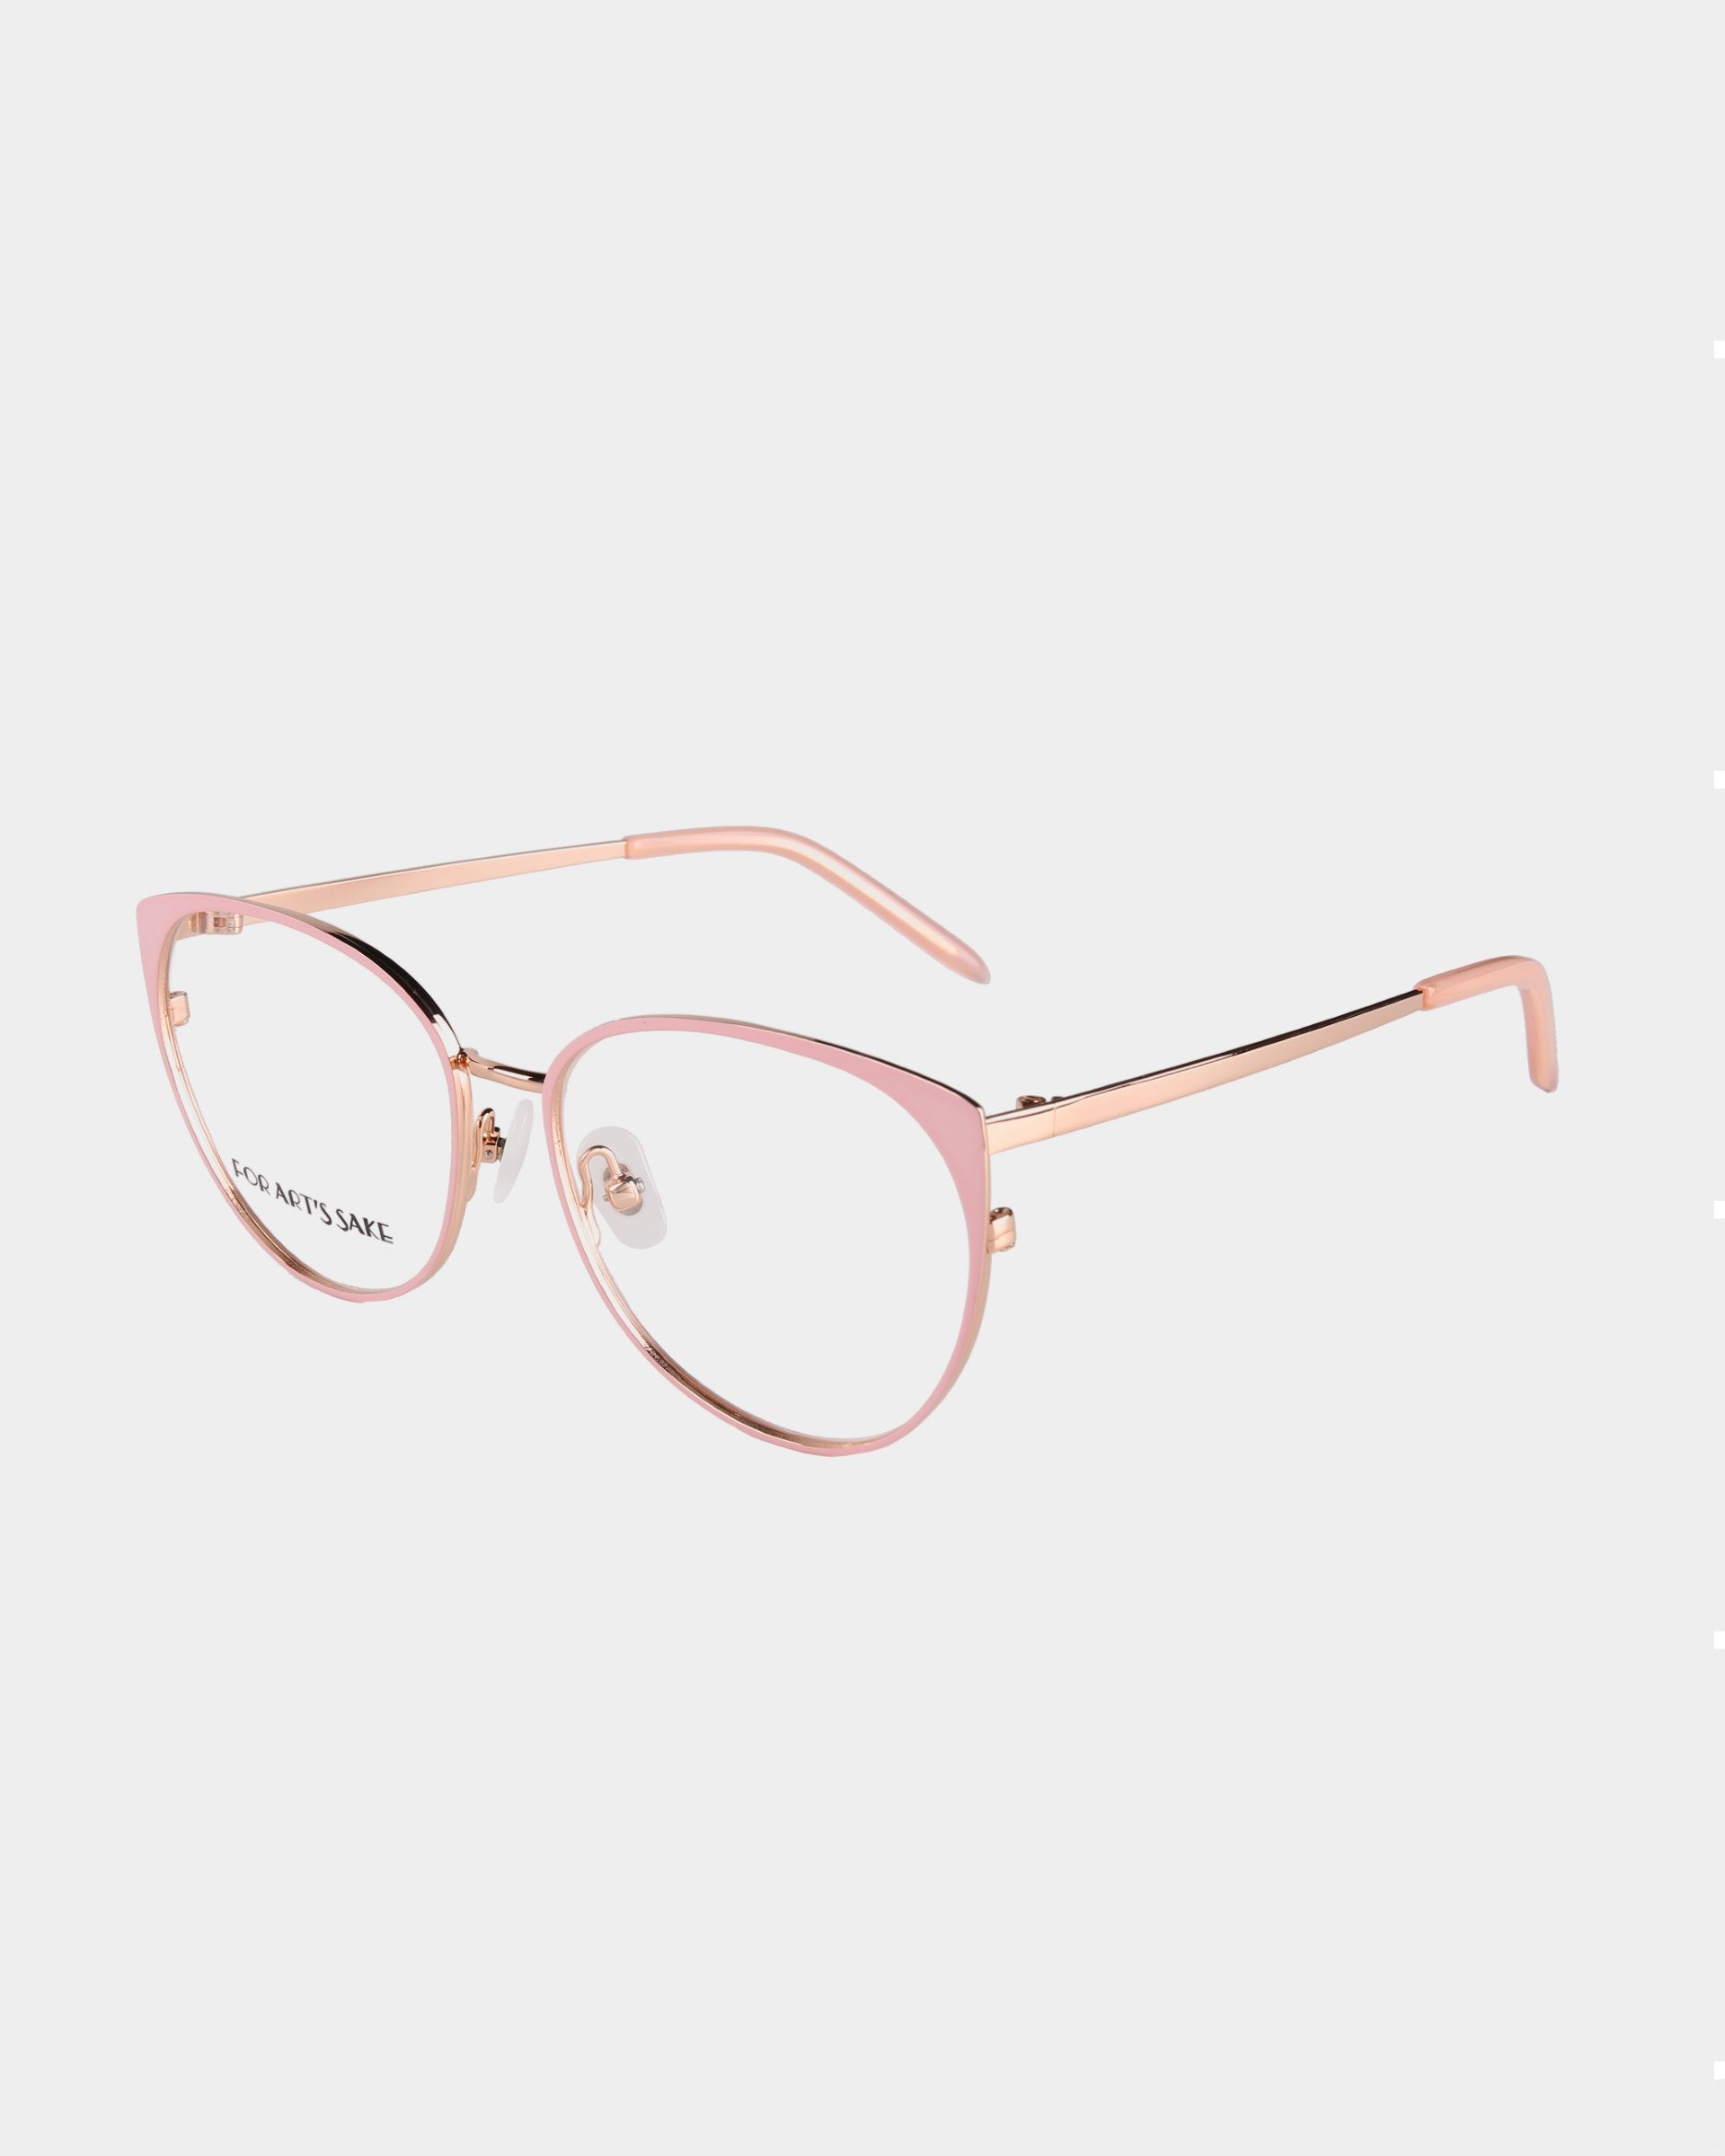 A pair of stylish Kaia by For Art&#39;s Sake® with pink metal cat-eye frames and transparent lenses, featuring blue light filter technology. The temples are slender with a metallic finish that complements the frame color, while the white background enhances the simplicity and elegance of the design.